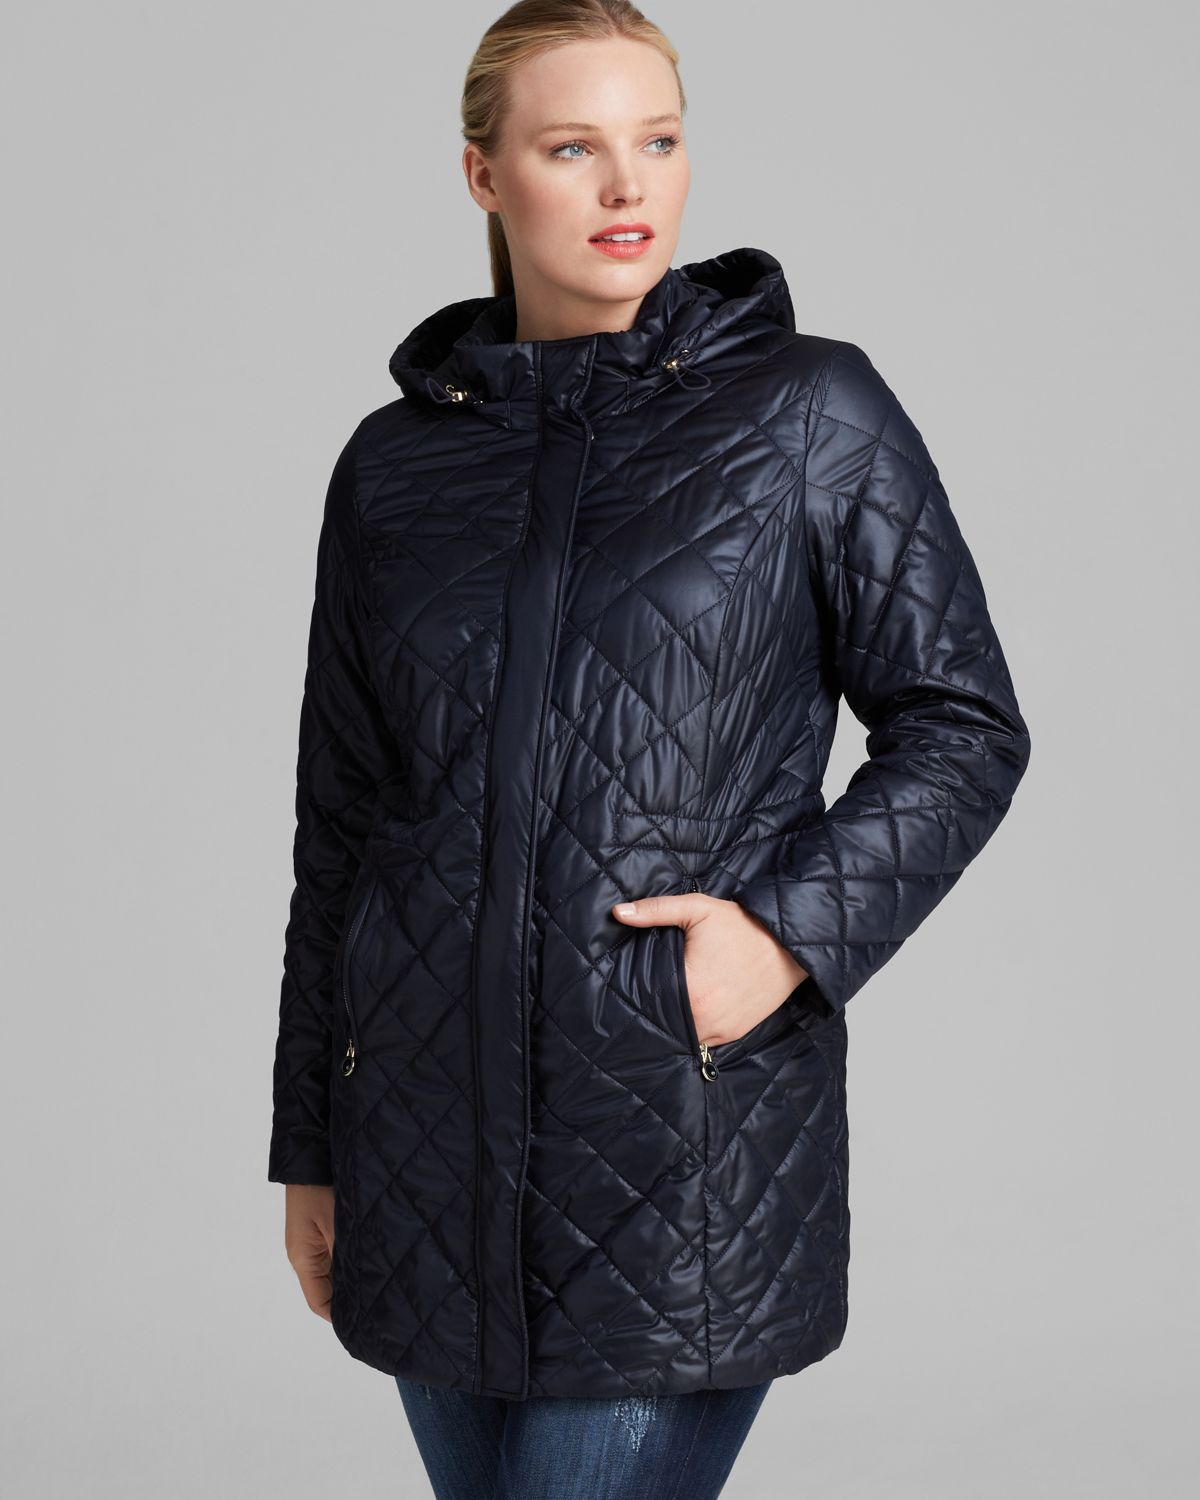 Lyst - Marina rinaldi Plus Padre Quilted Jacket in Blue